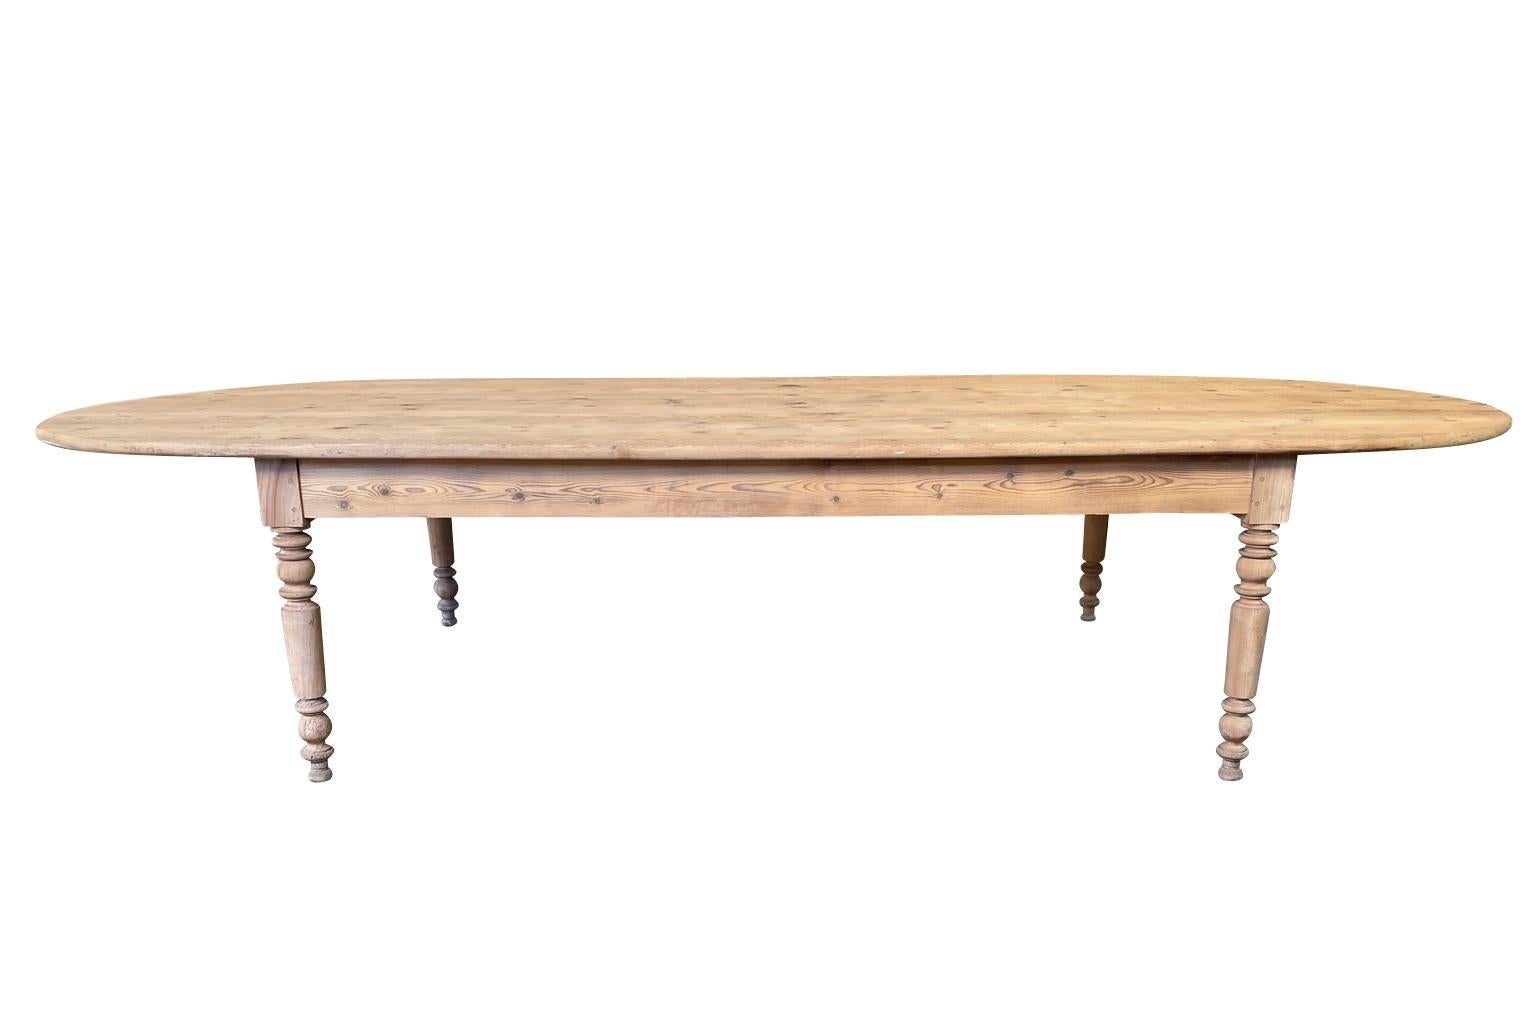 A wonderful Louis Philippe period Dining Table from the South of France. Beautifully constructed from washed pine in an oval shape. Perfect for large family gatherings.